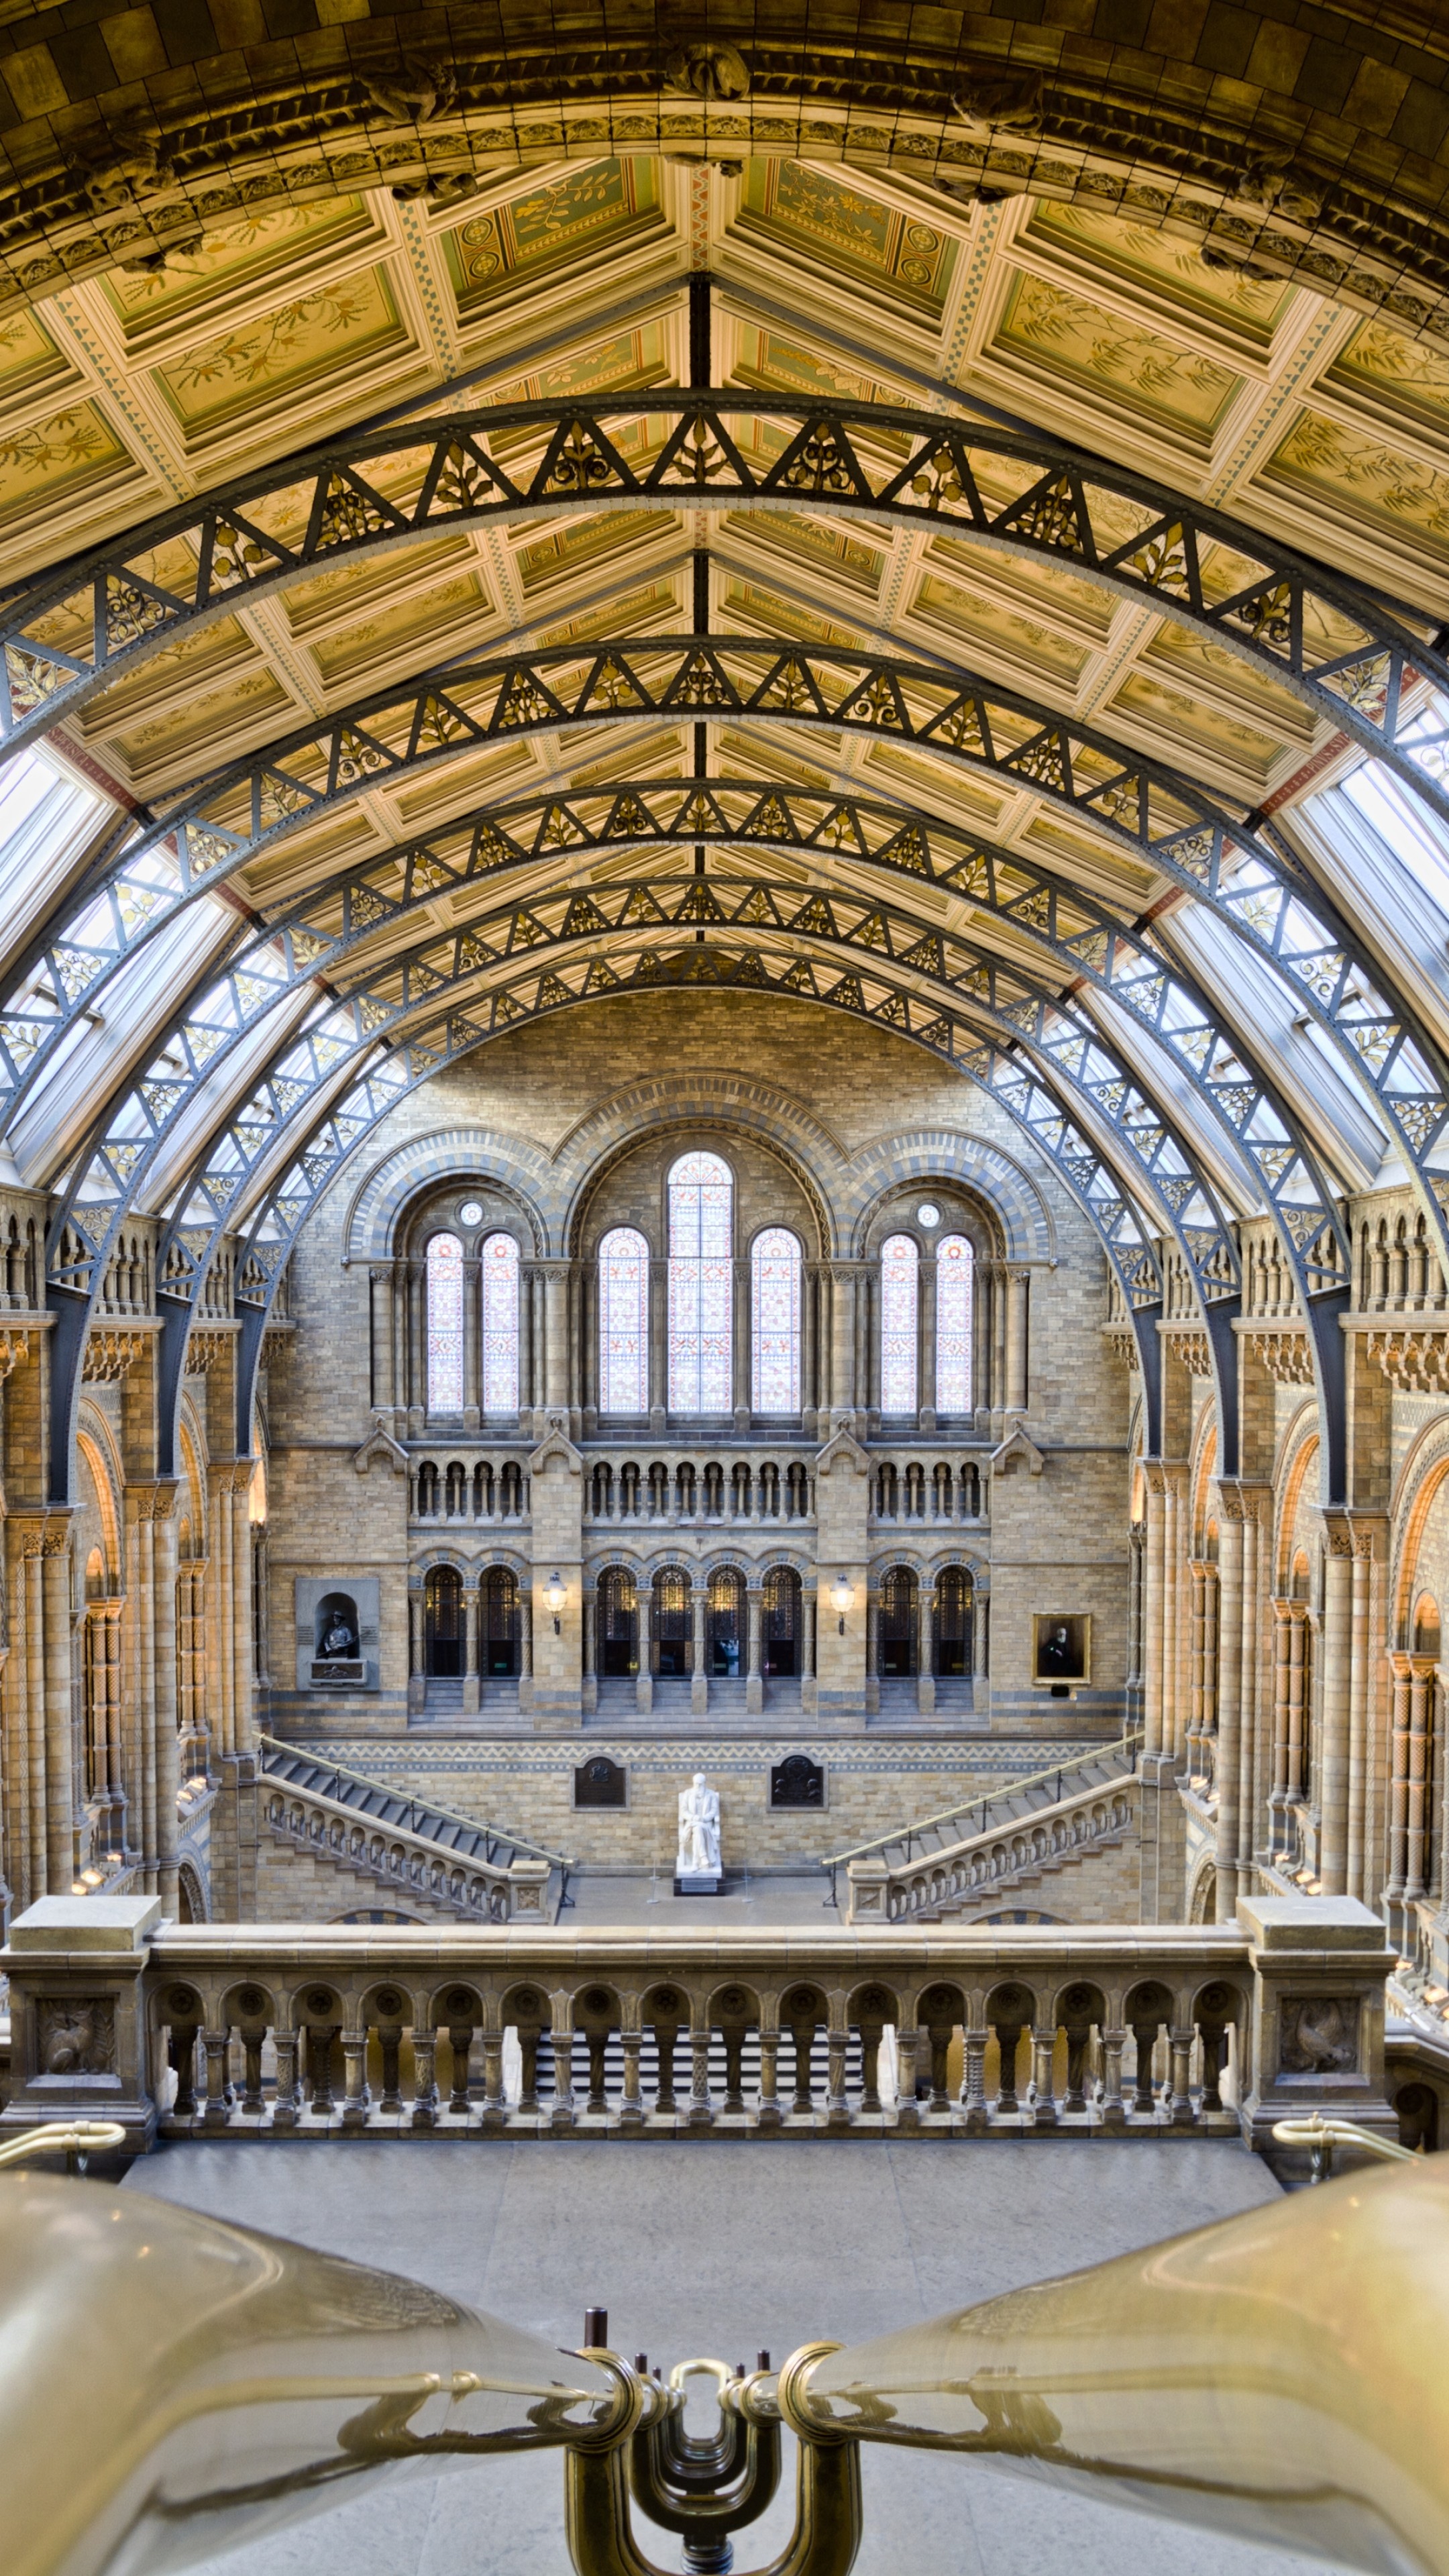 Gothic Architecture: Natural History Museum, London, The rib vault, Stained-glass windows, Symmetry. 2160x3840 4K Background.